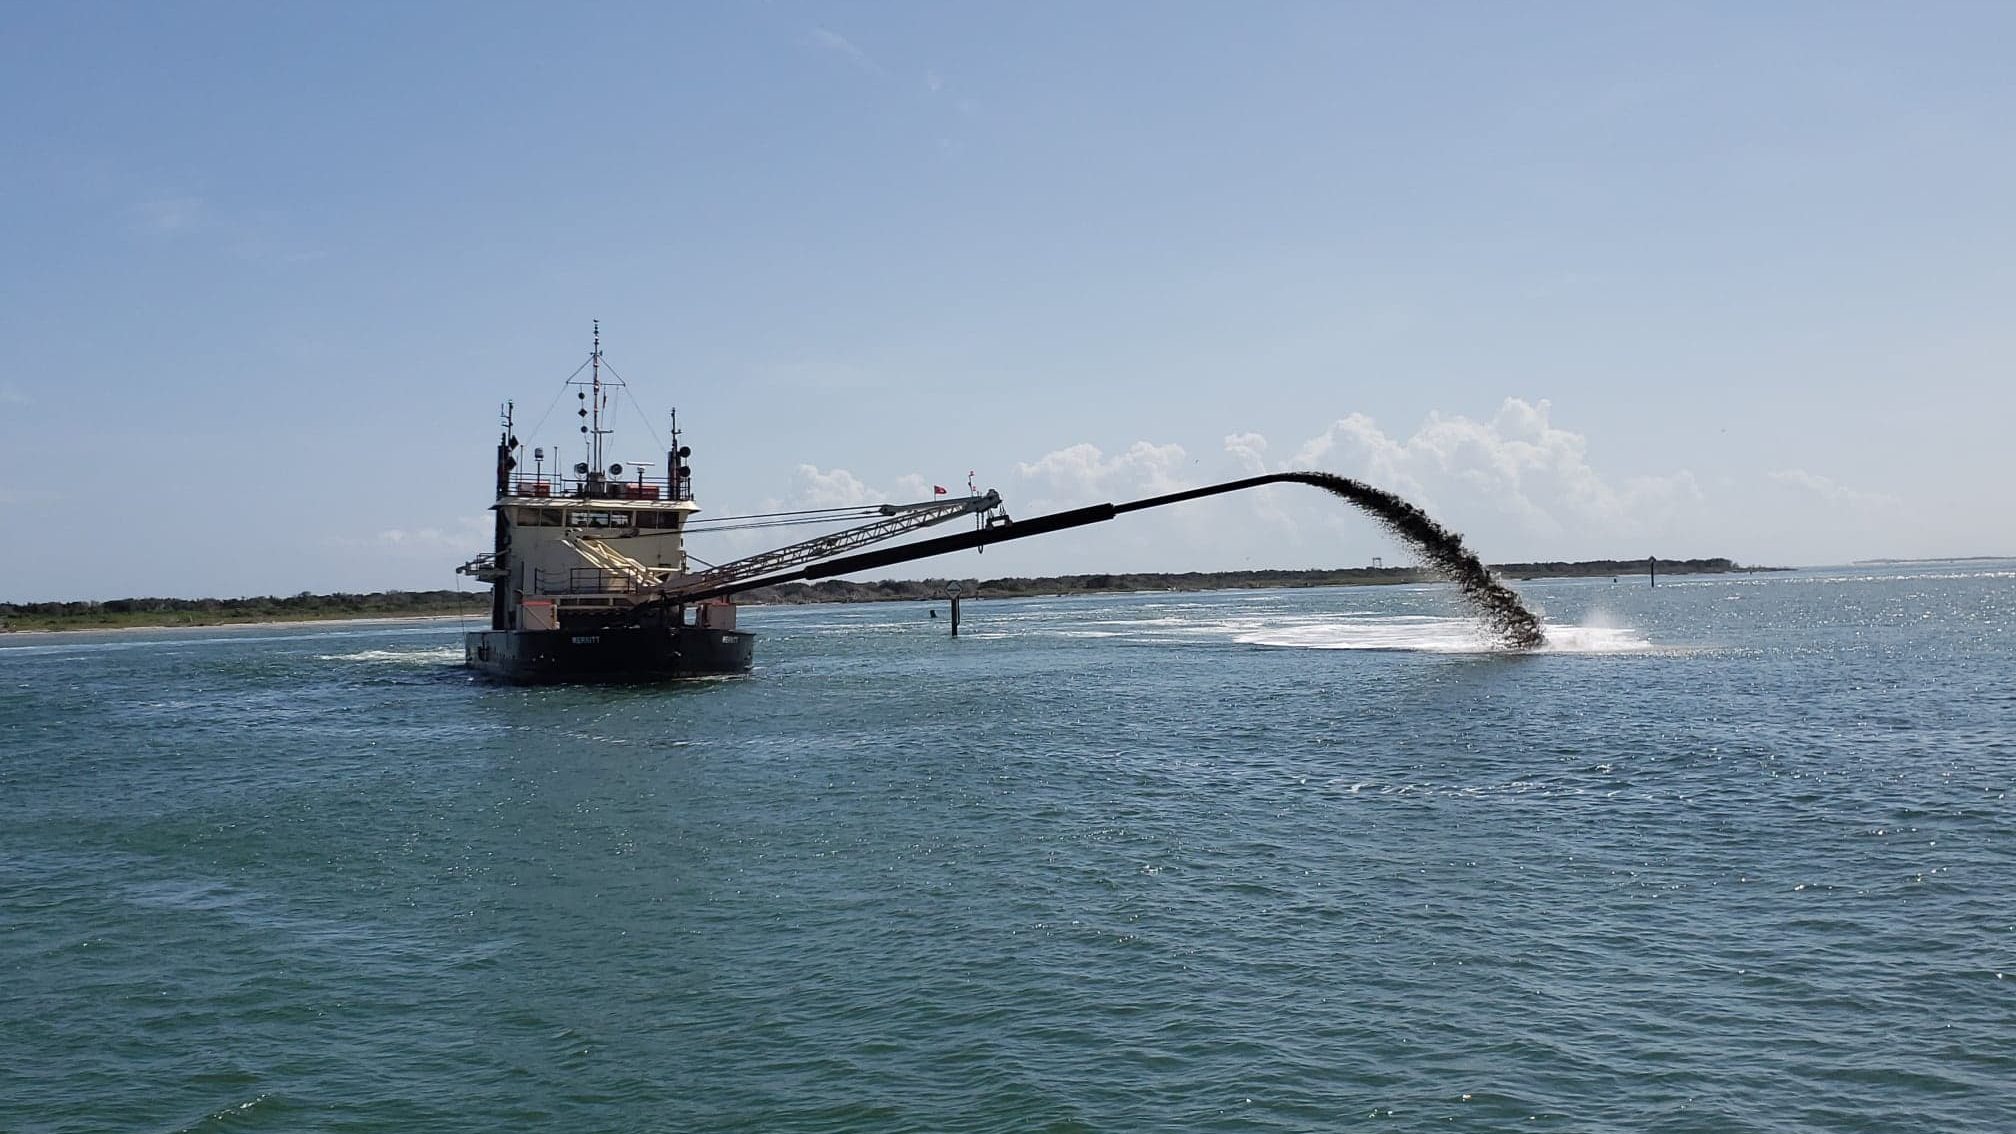 Dredging of channels across Hatteras Inlet to continue through end of month